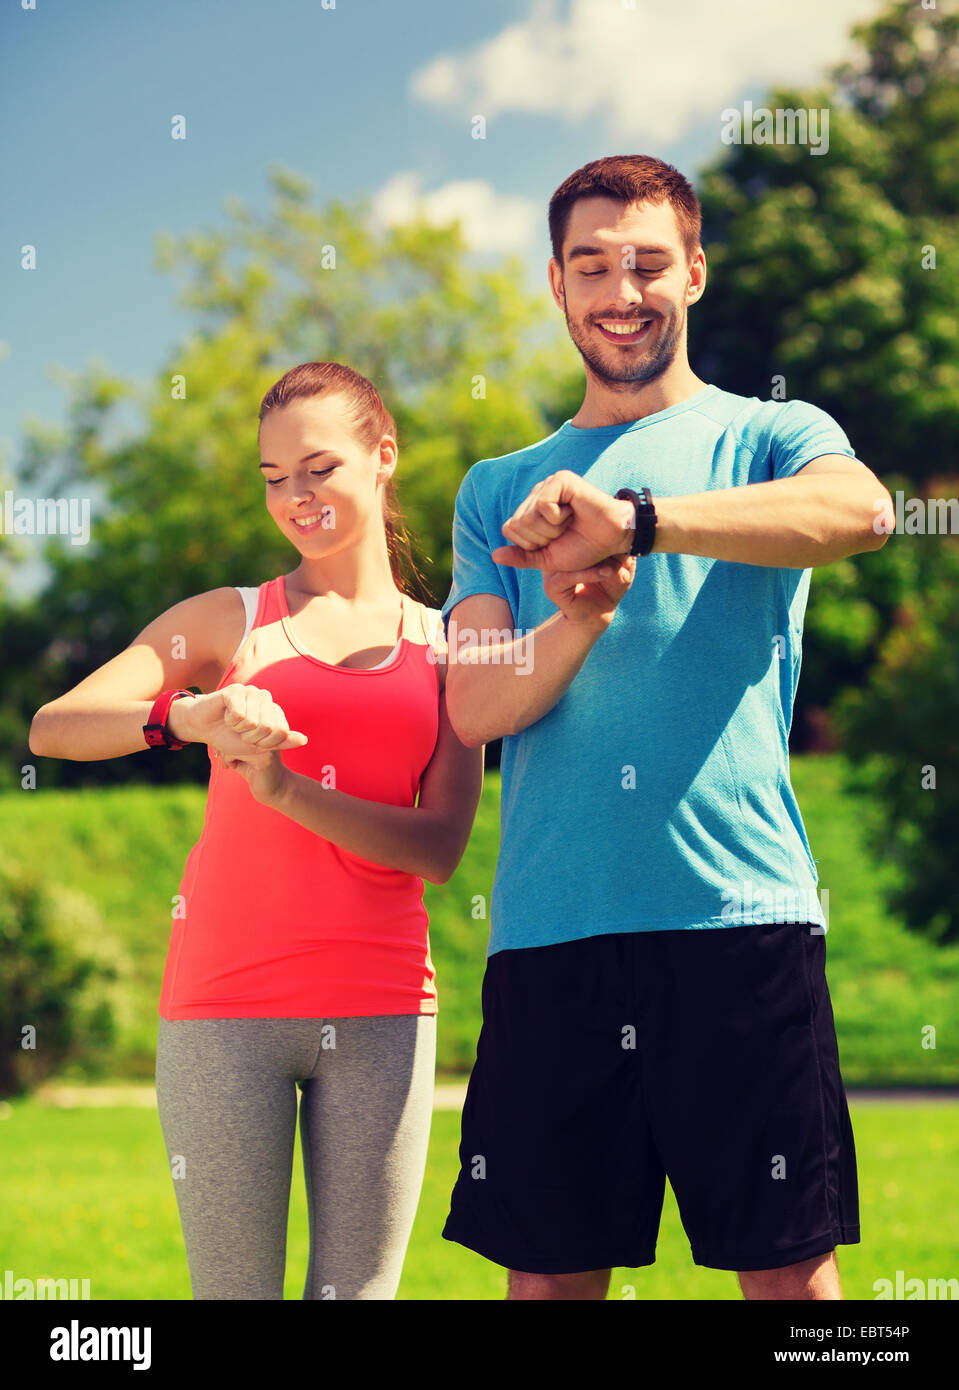 smiling people with heart rate watches outdoors Stock Photo